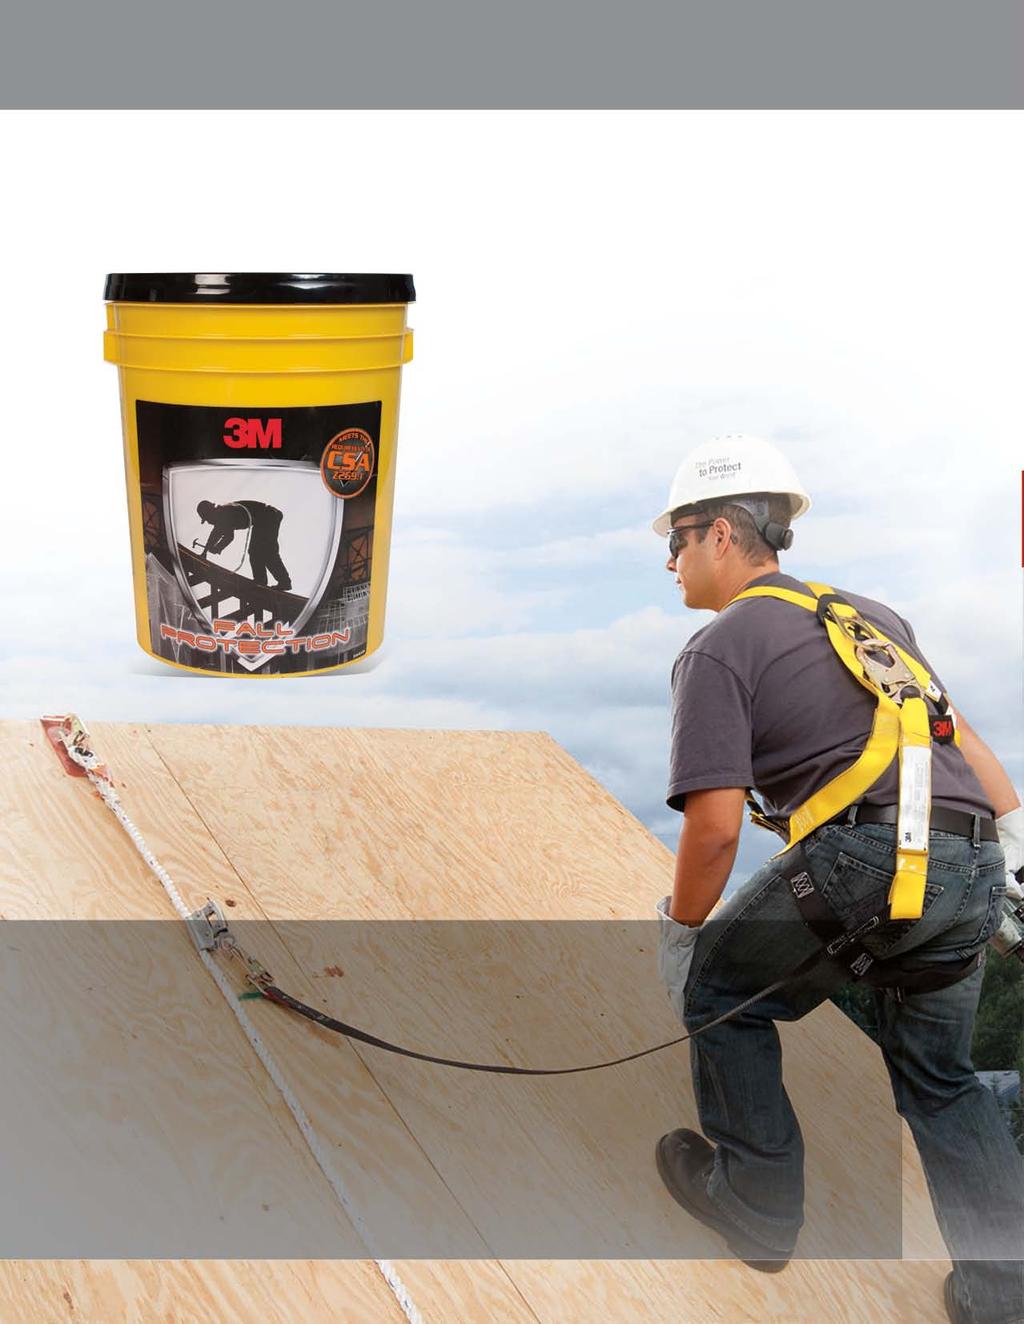 Roofing Kit The 3M Roofing Kit provides a complete fall protection system in a portable and convenient 5-gallon bucket.